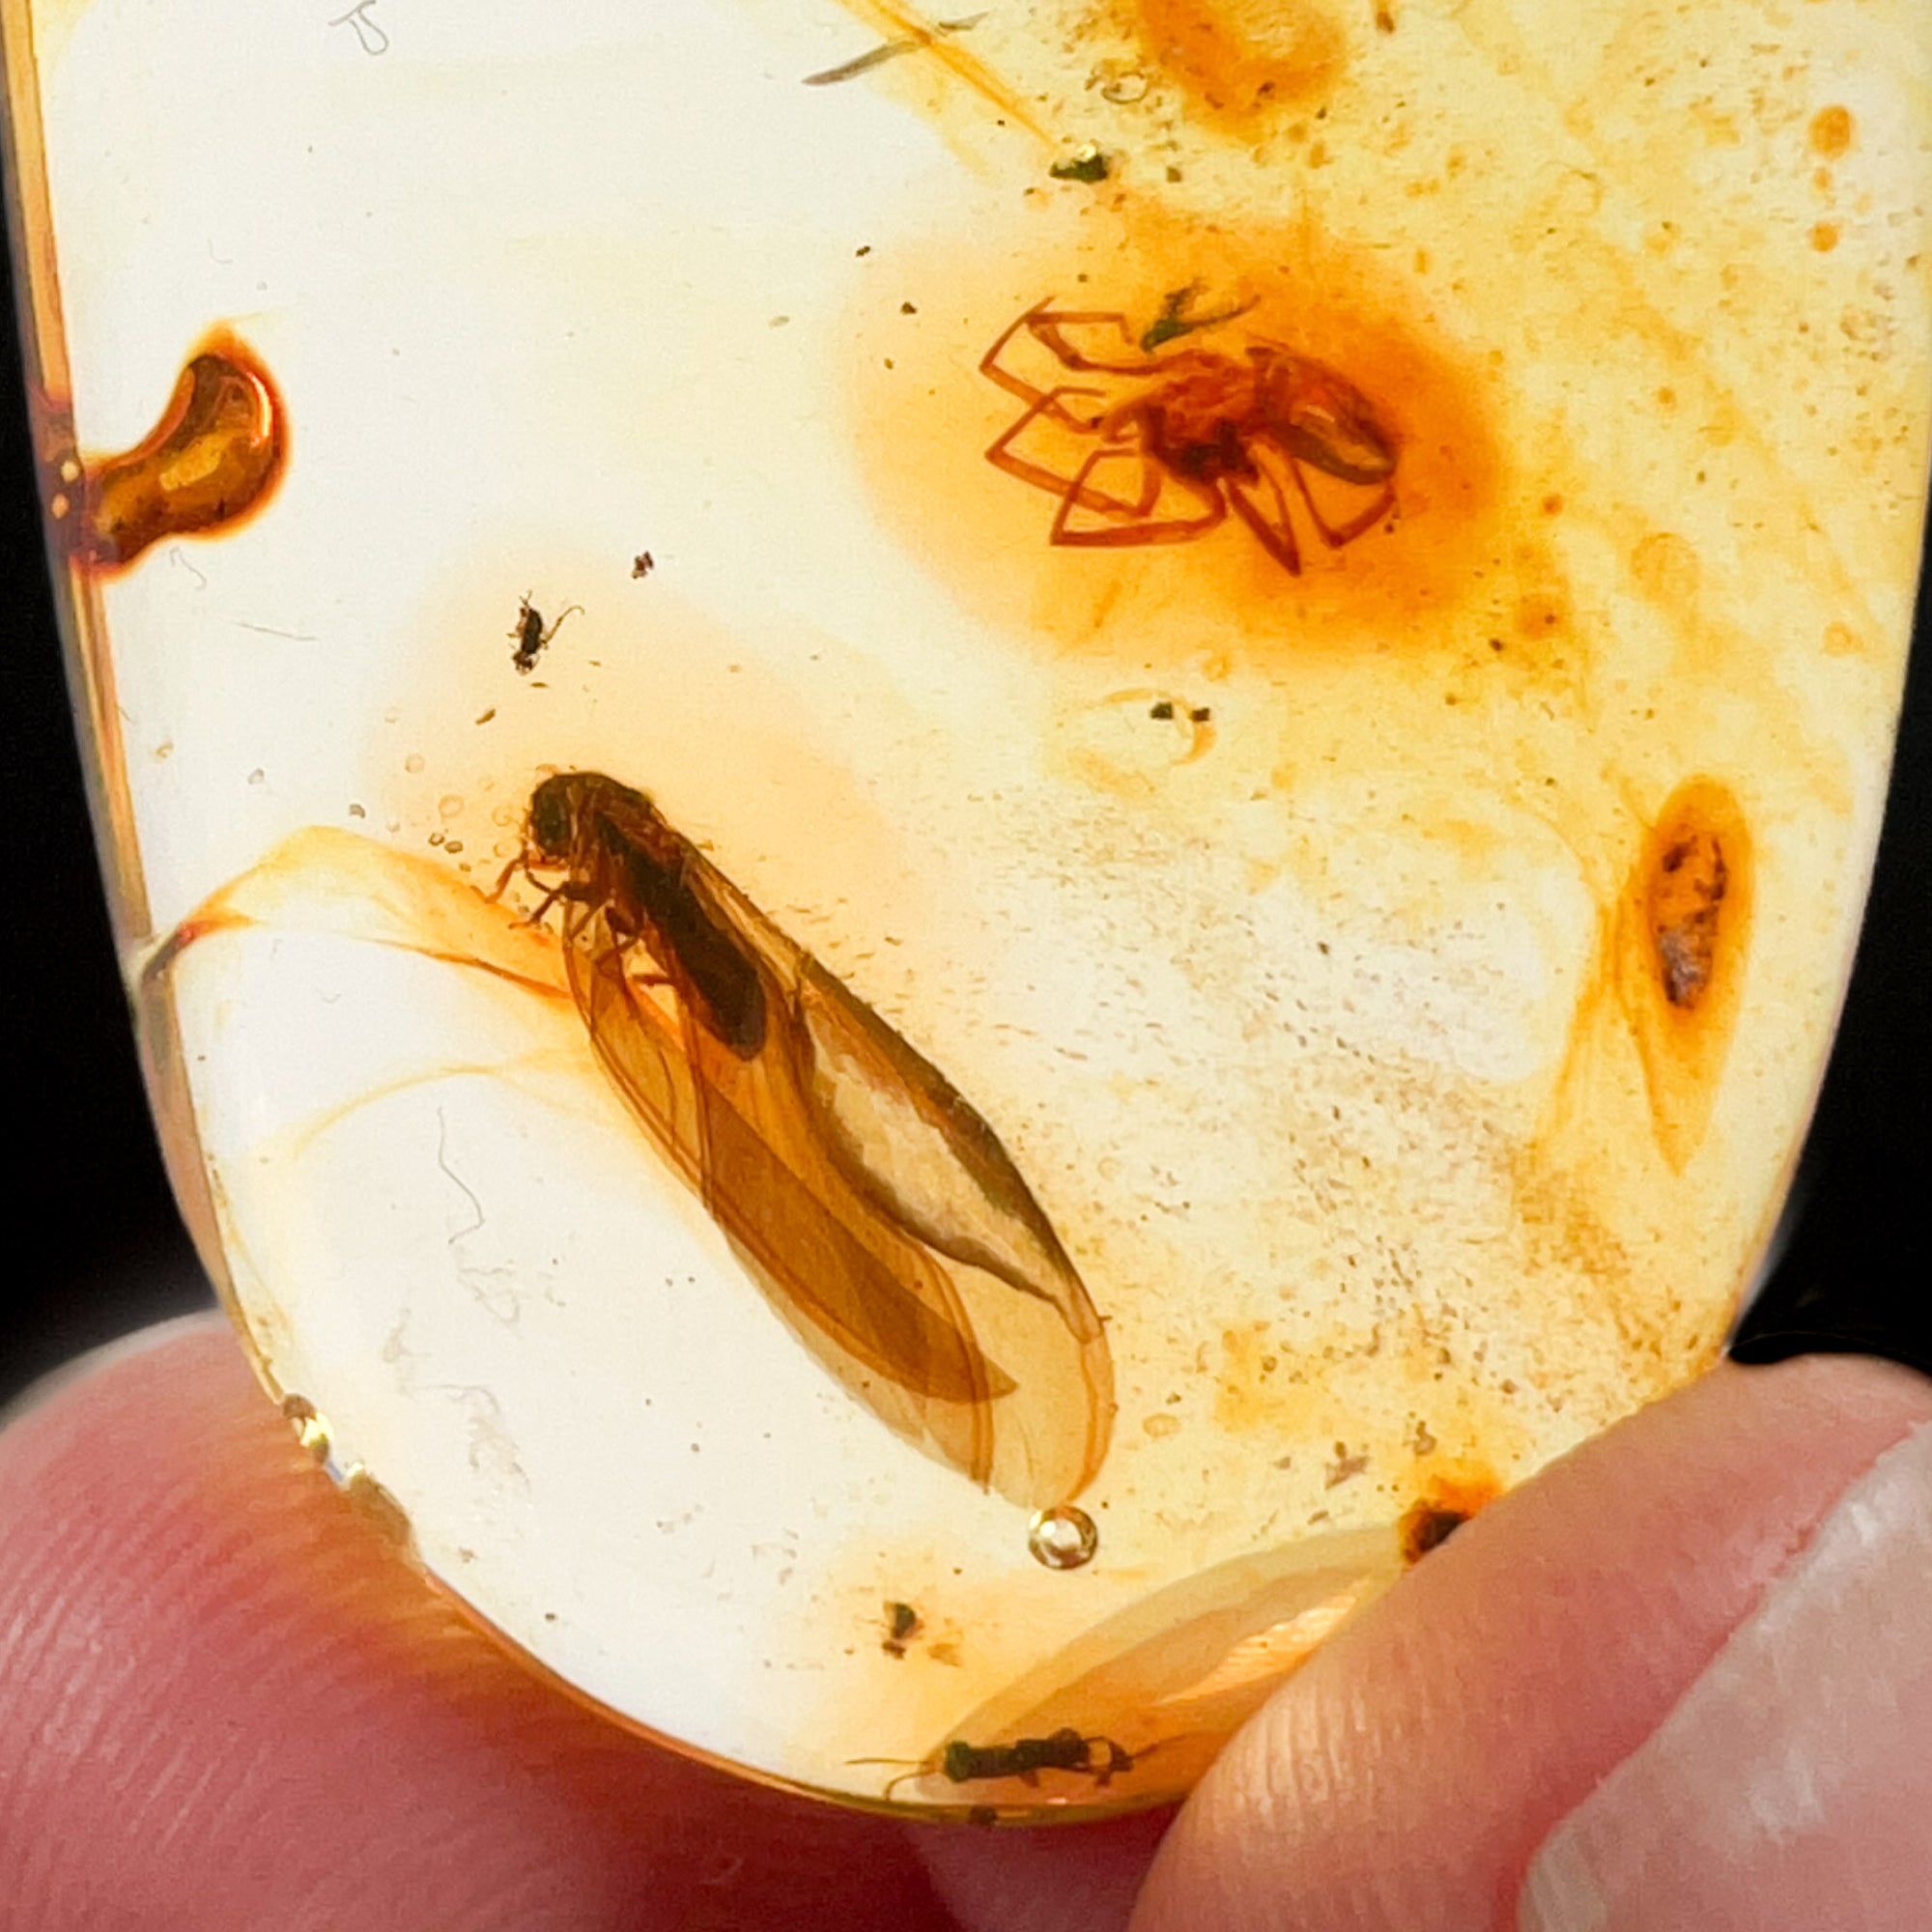 Polished Copal Amber with Insects from Colombia